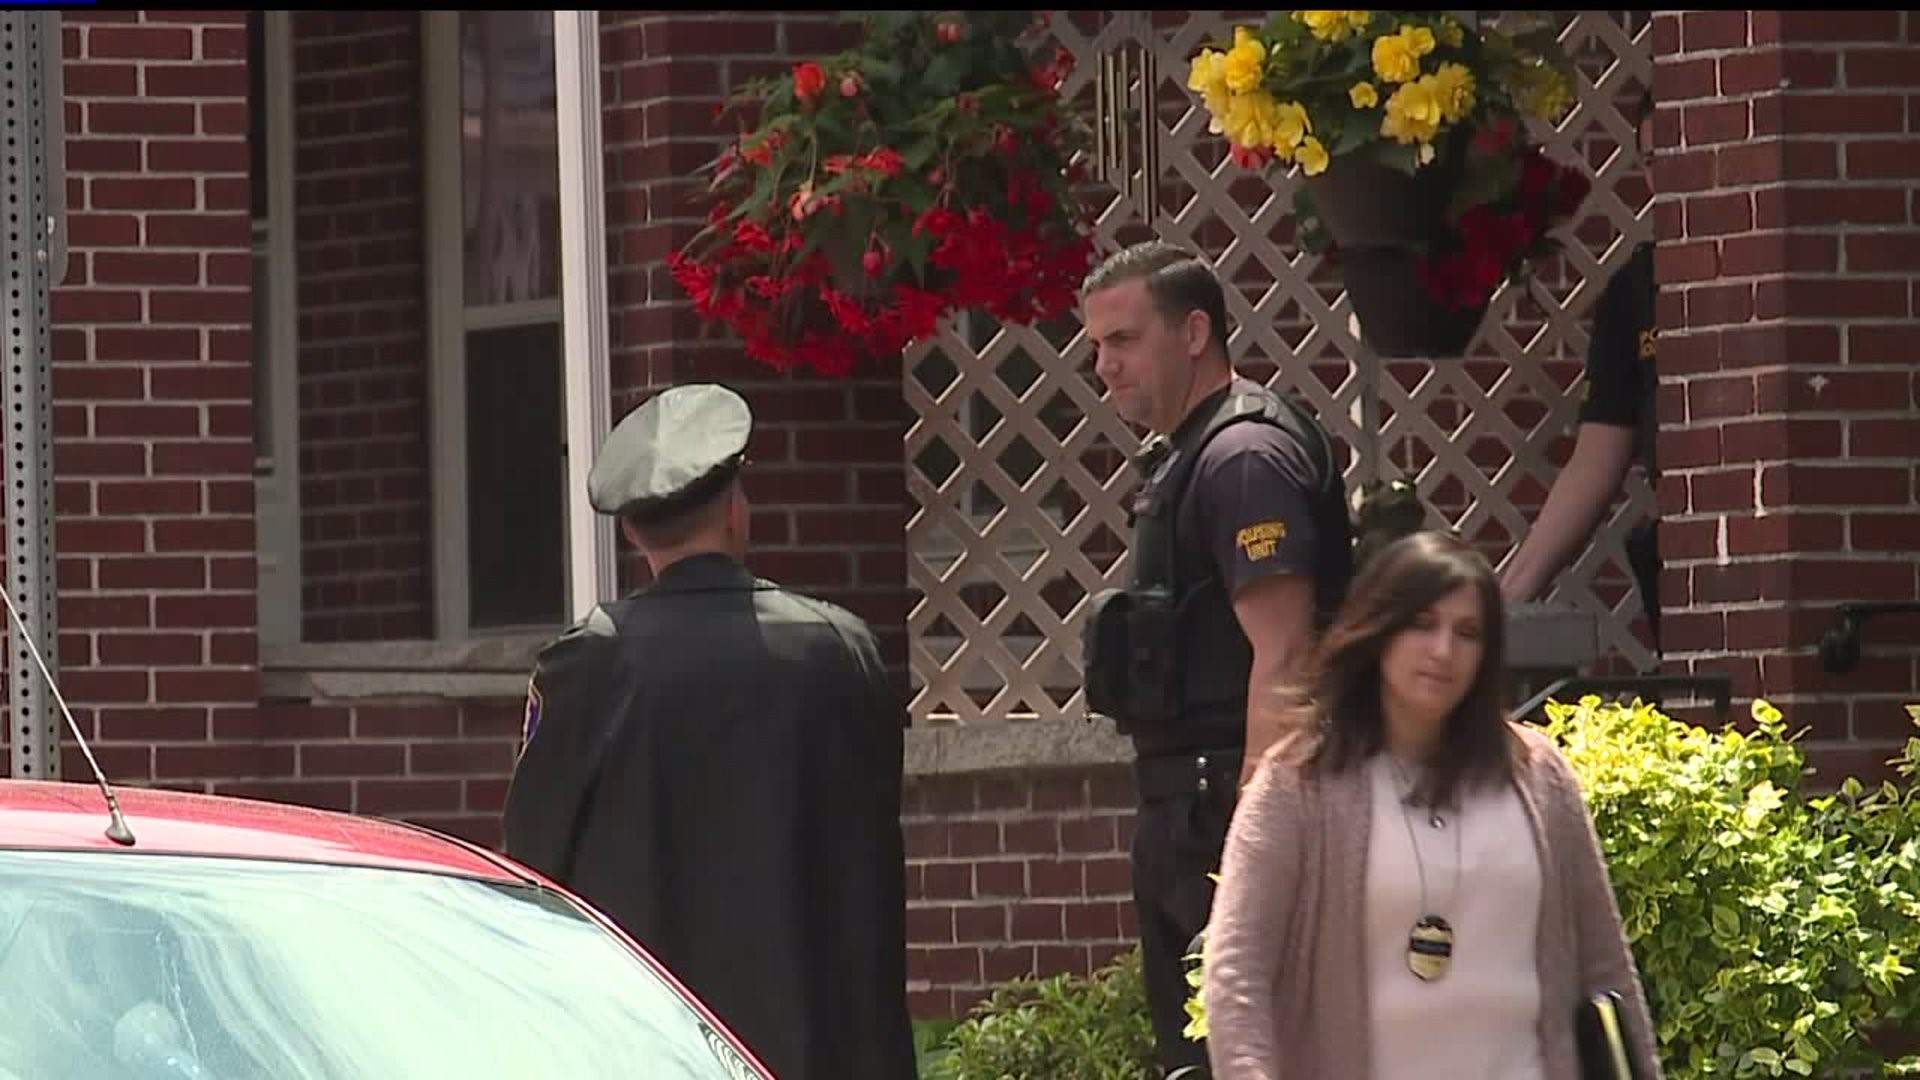 Shooting at Home Owned by Harrisburg Judge